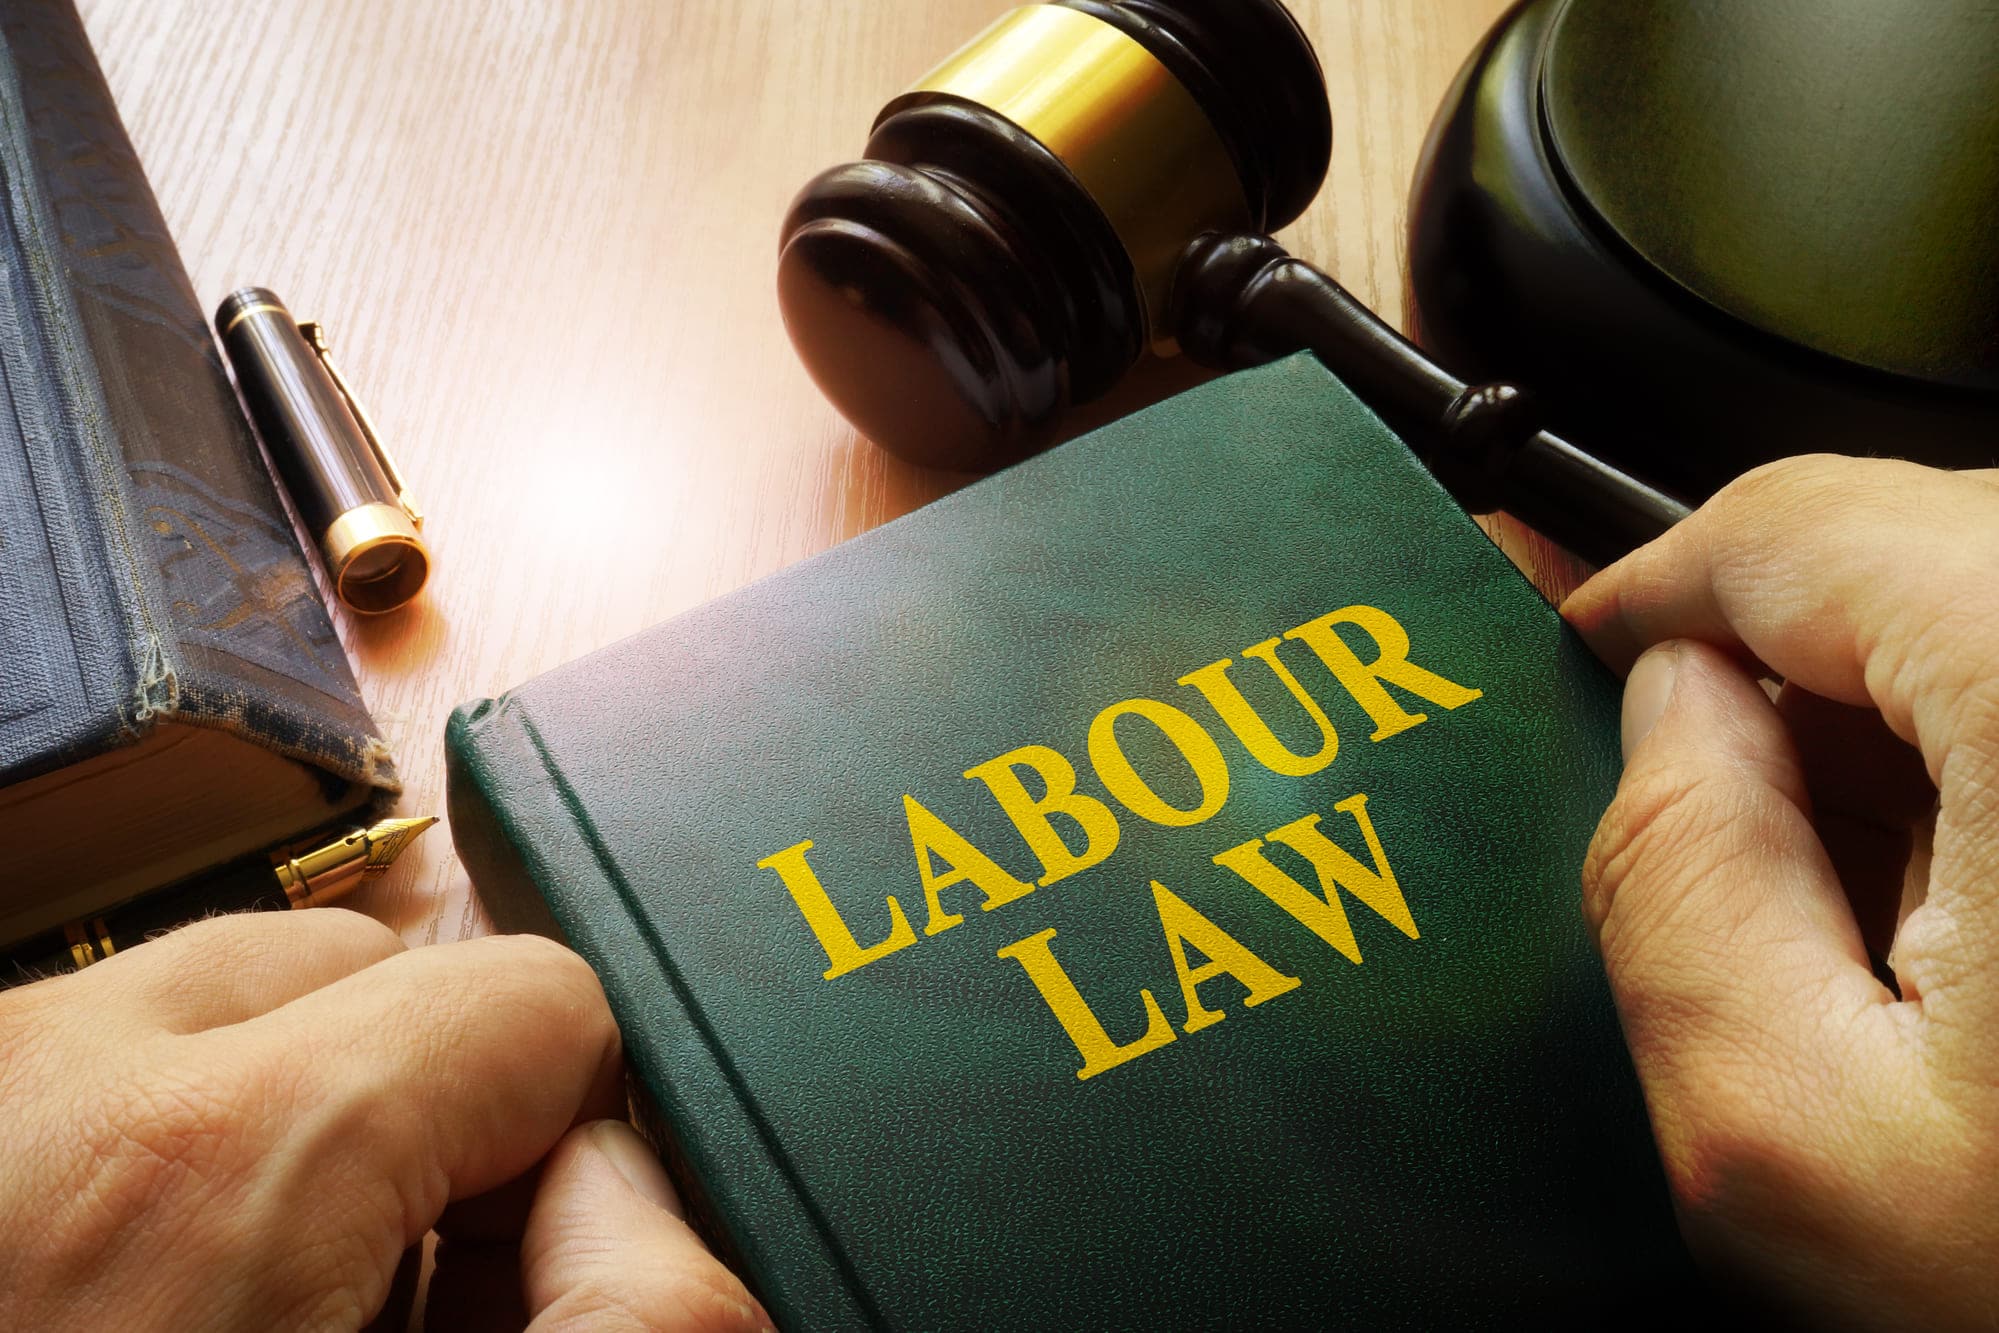 KNOWLEDGE OF THE STATE LABOR LAWS